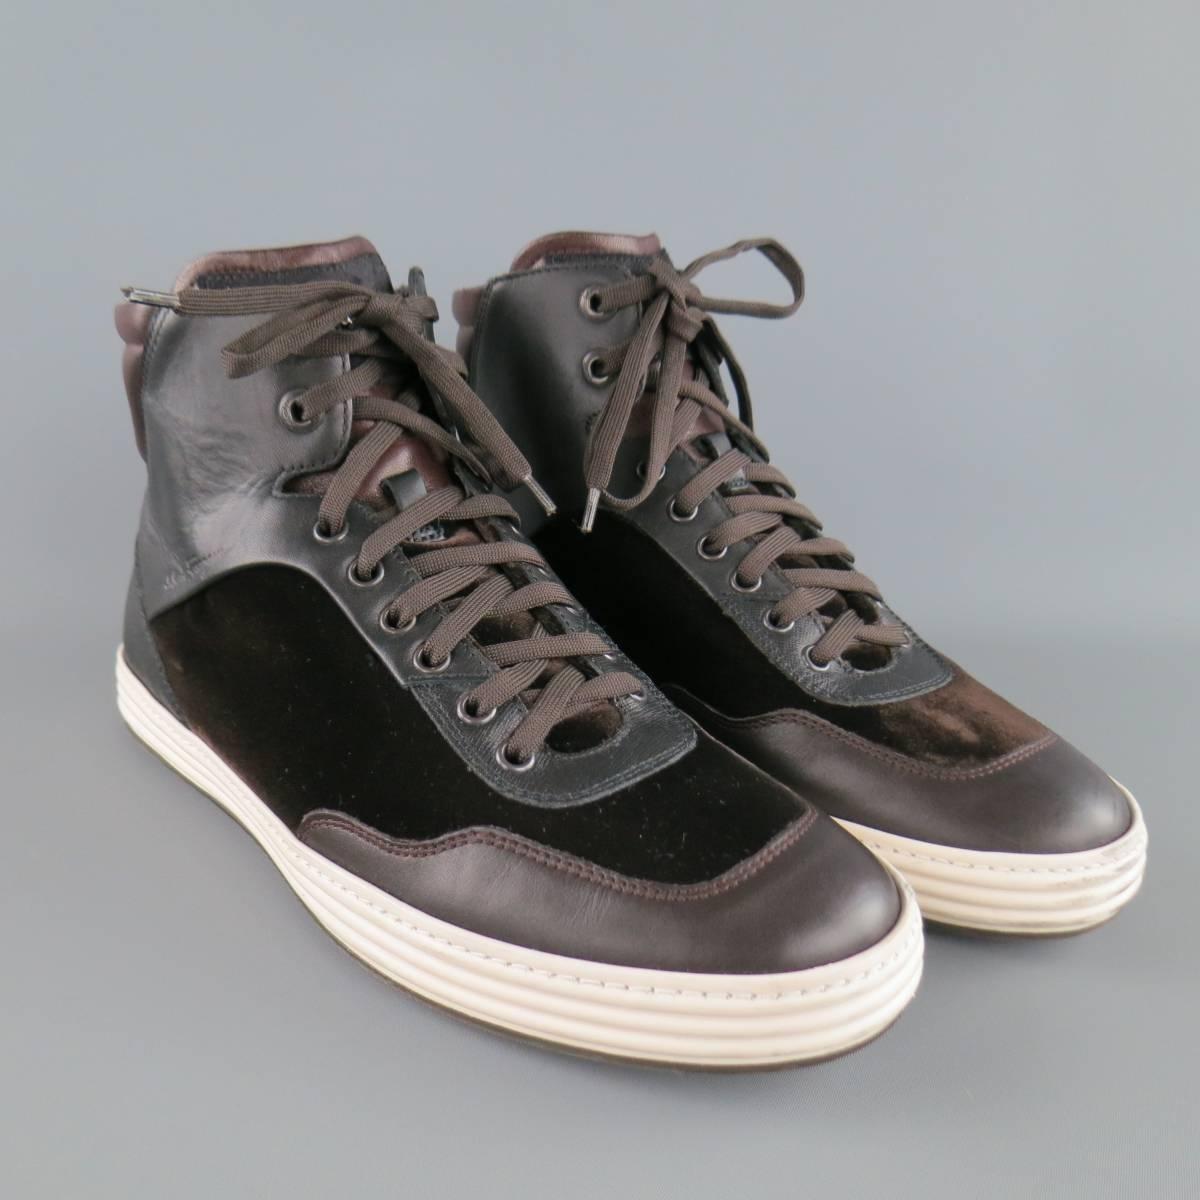 SALVATORE FERRAGAMO high top sneakers come in chocolate brown leather and features black leather  and velvet panels with a white sole. Made in Italy.
 
Excellent Pre-Owned Condition.
Marked: 8.5 D
 
Outsole: 11.5 x 4 in.
Height: 5 in.


Web ID: